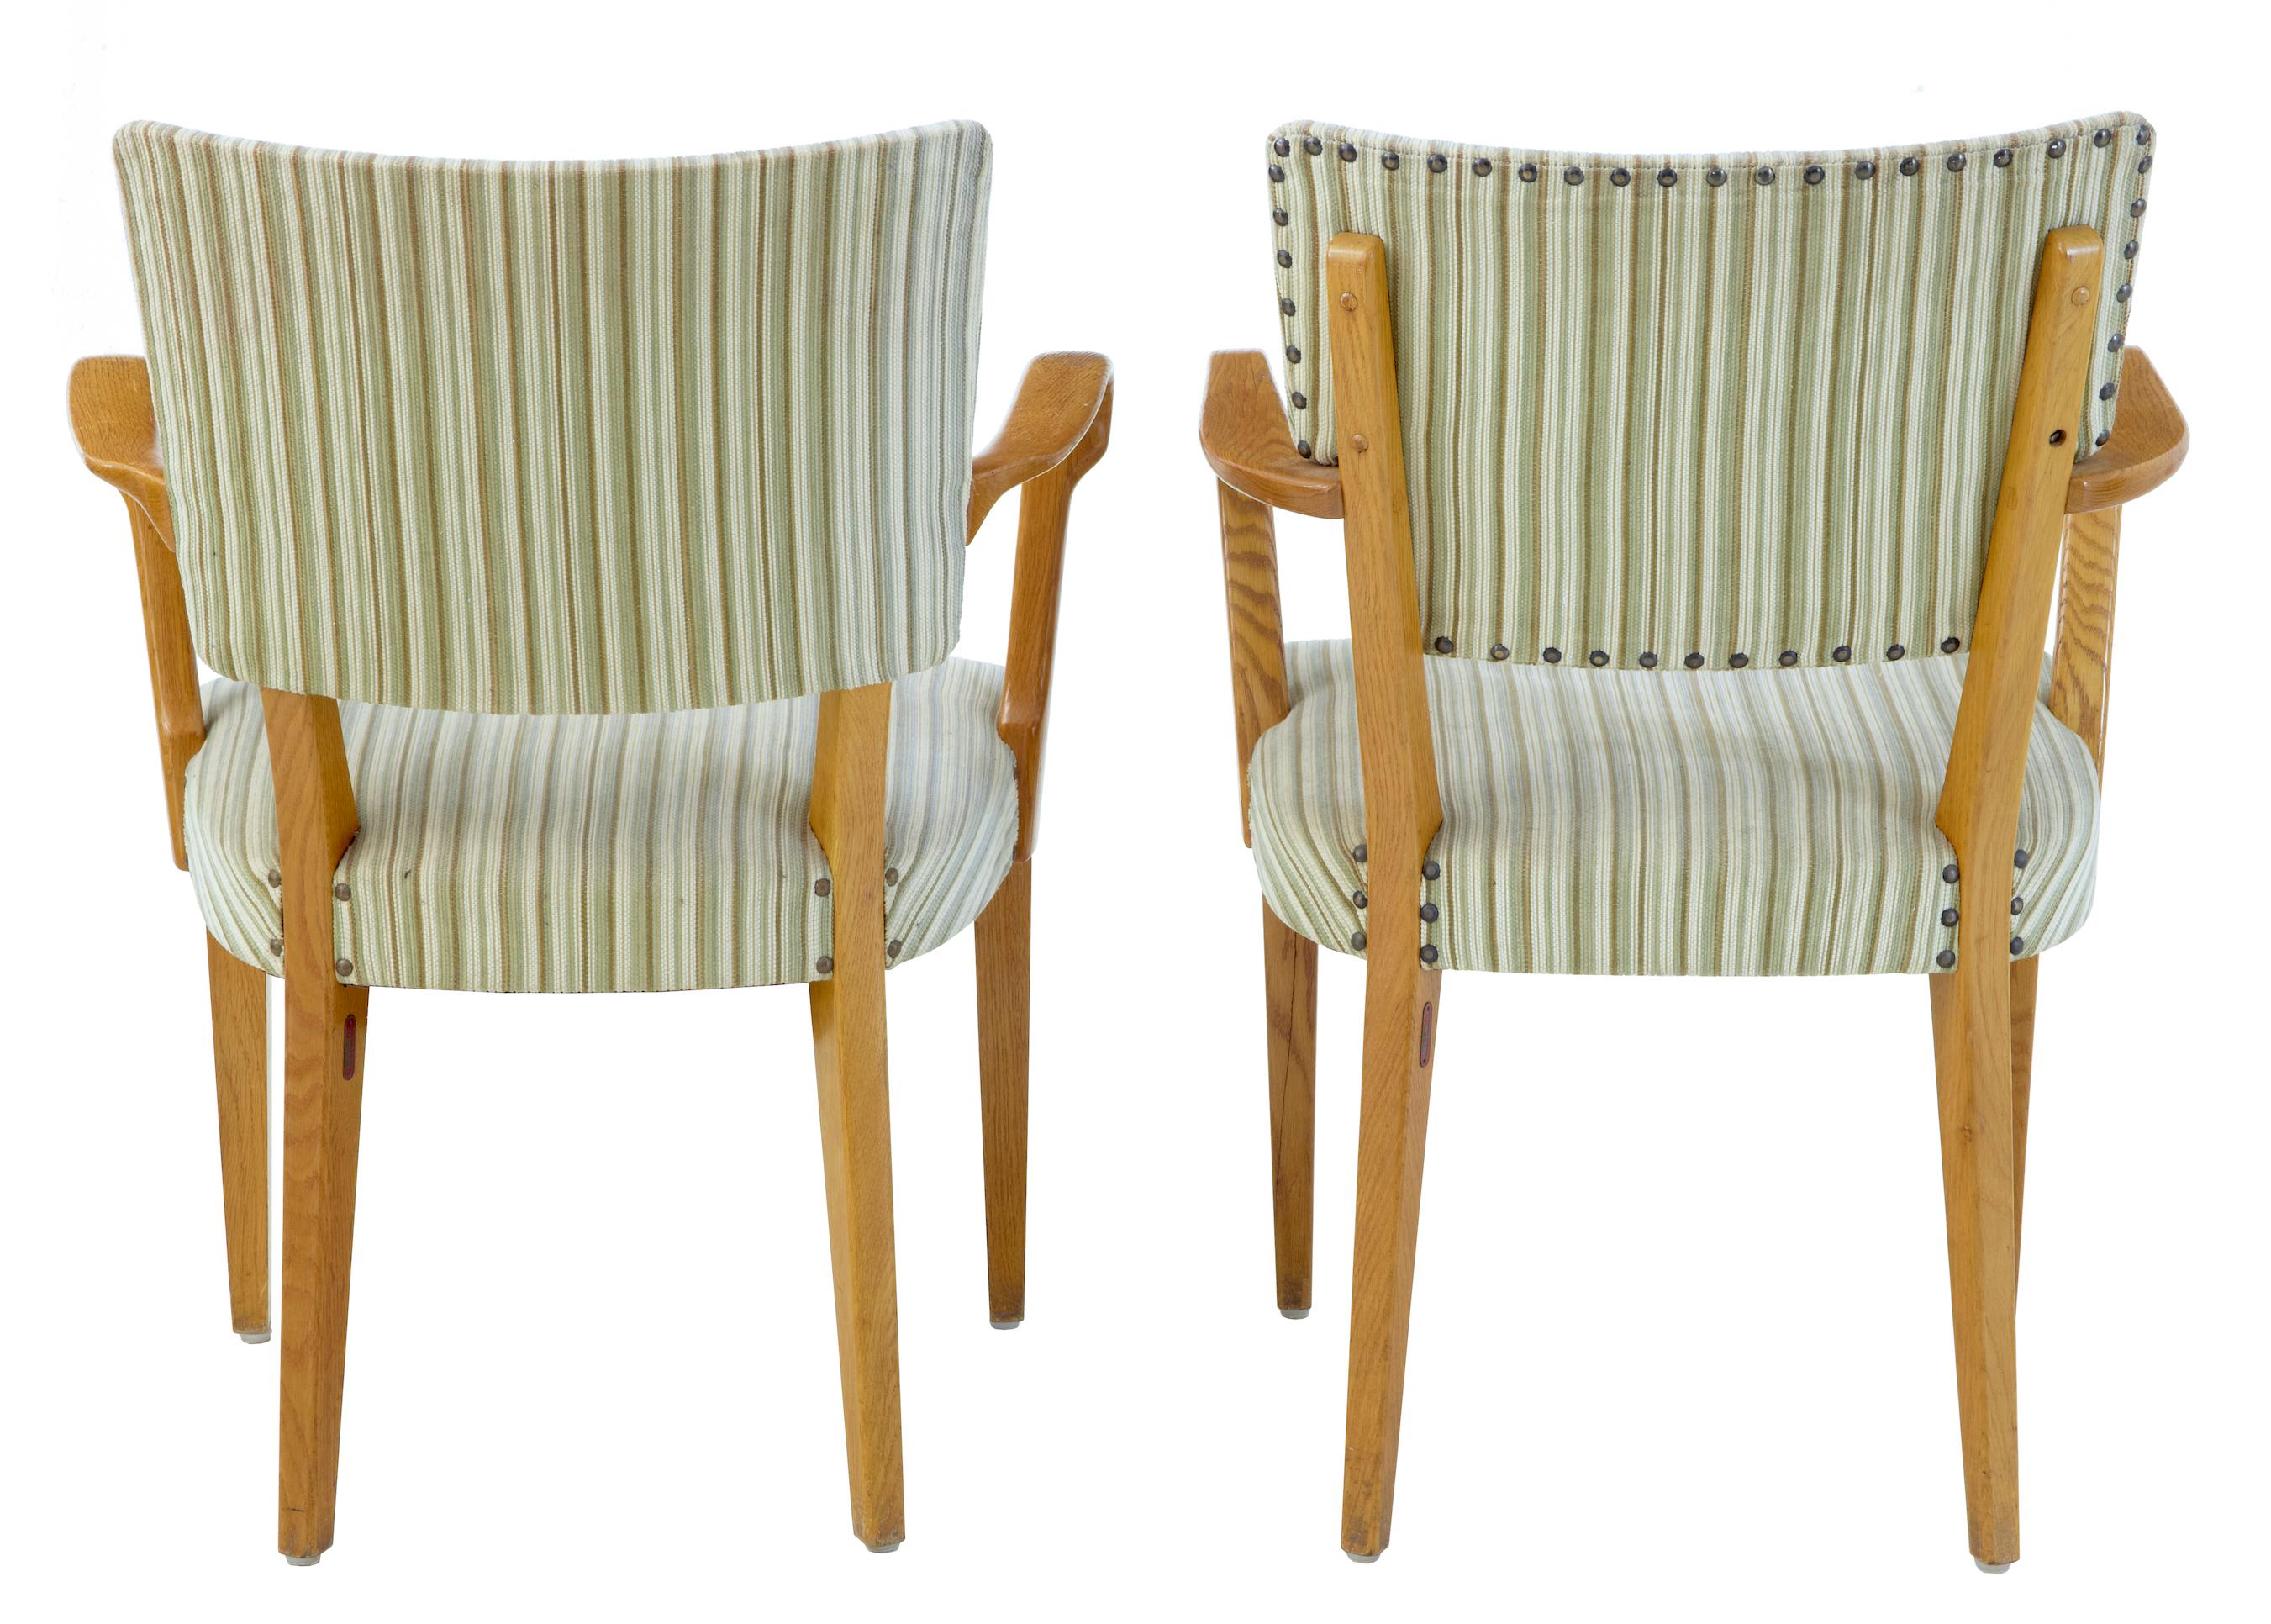 Woodwork Harlequin Set of 6 Swedish 1960s Armchairs by Atvidabergs